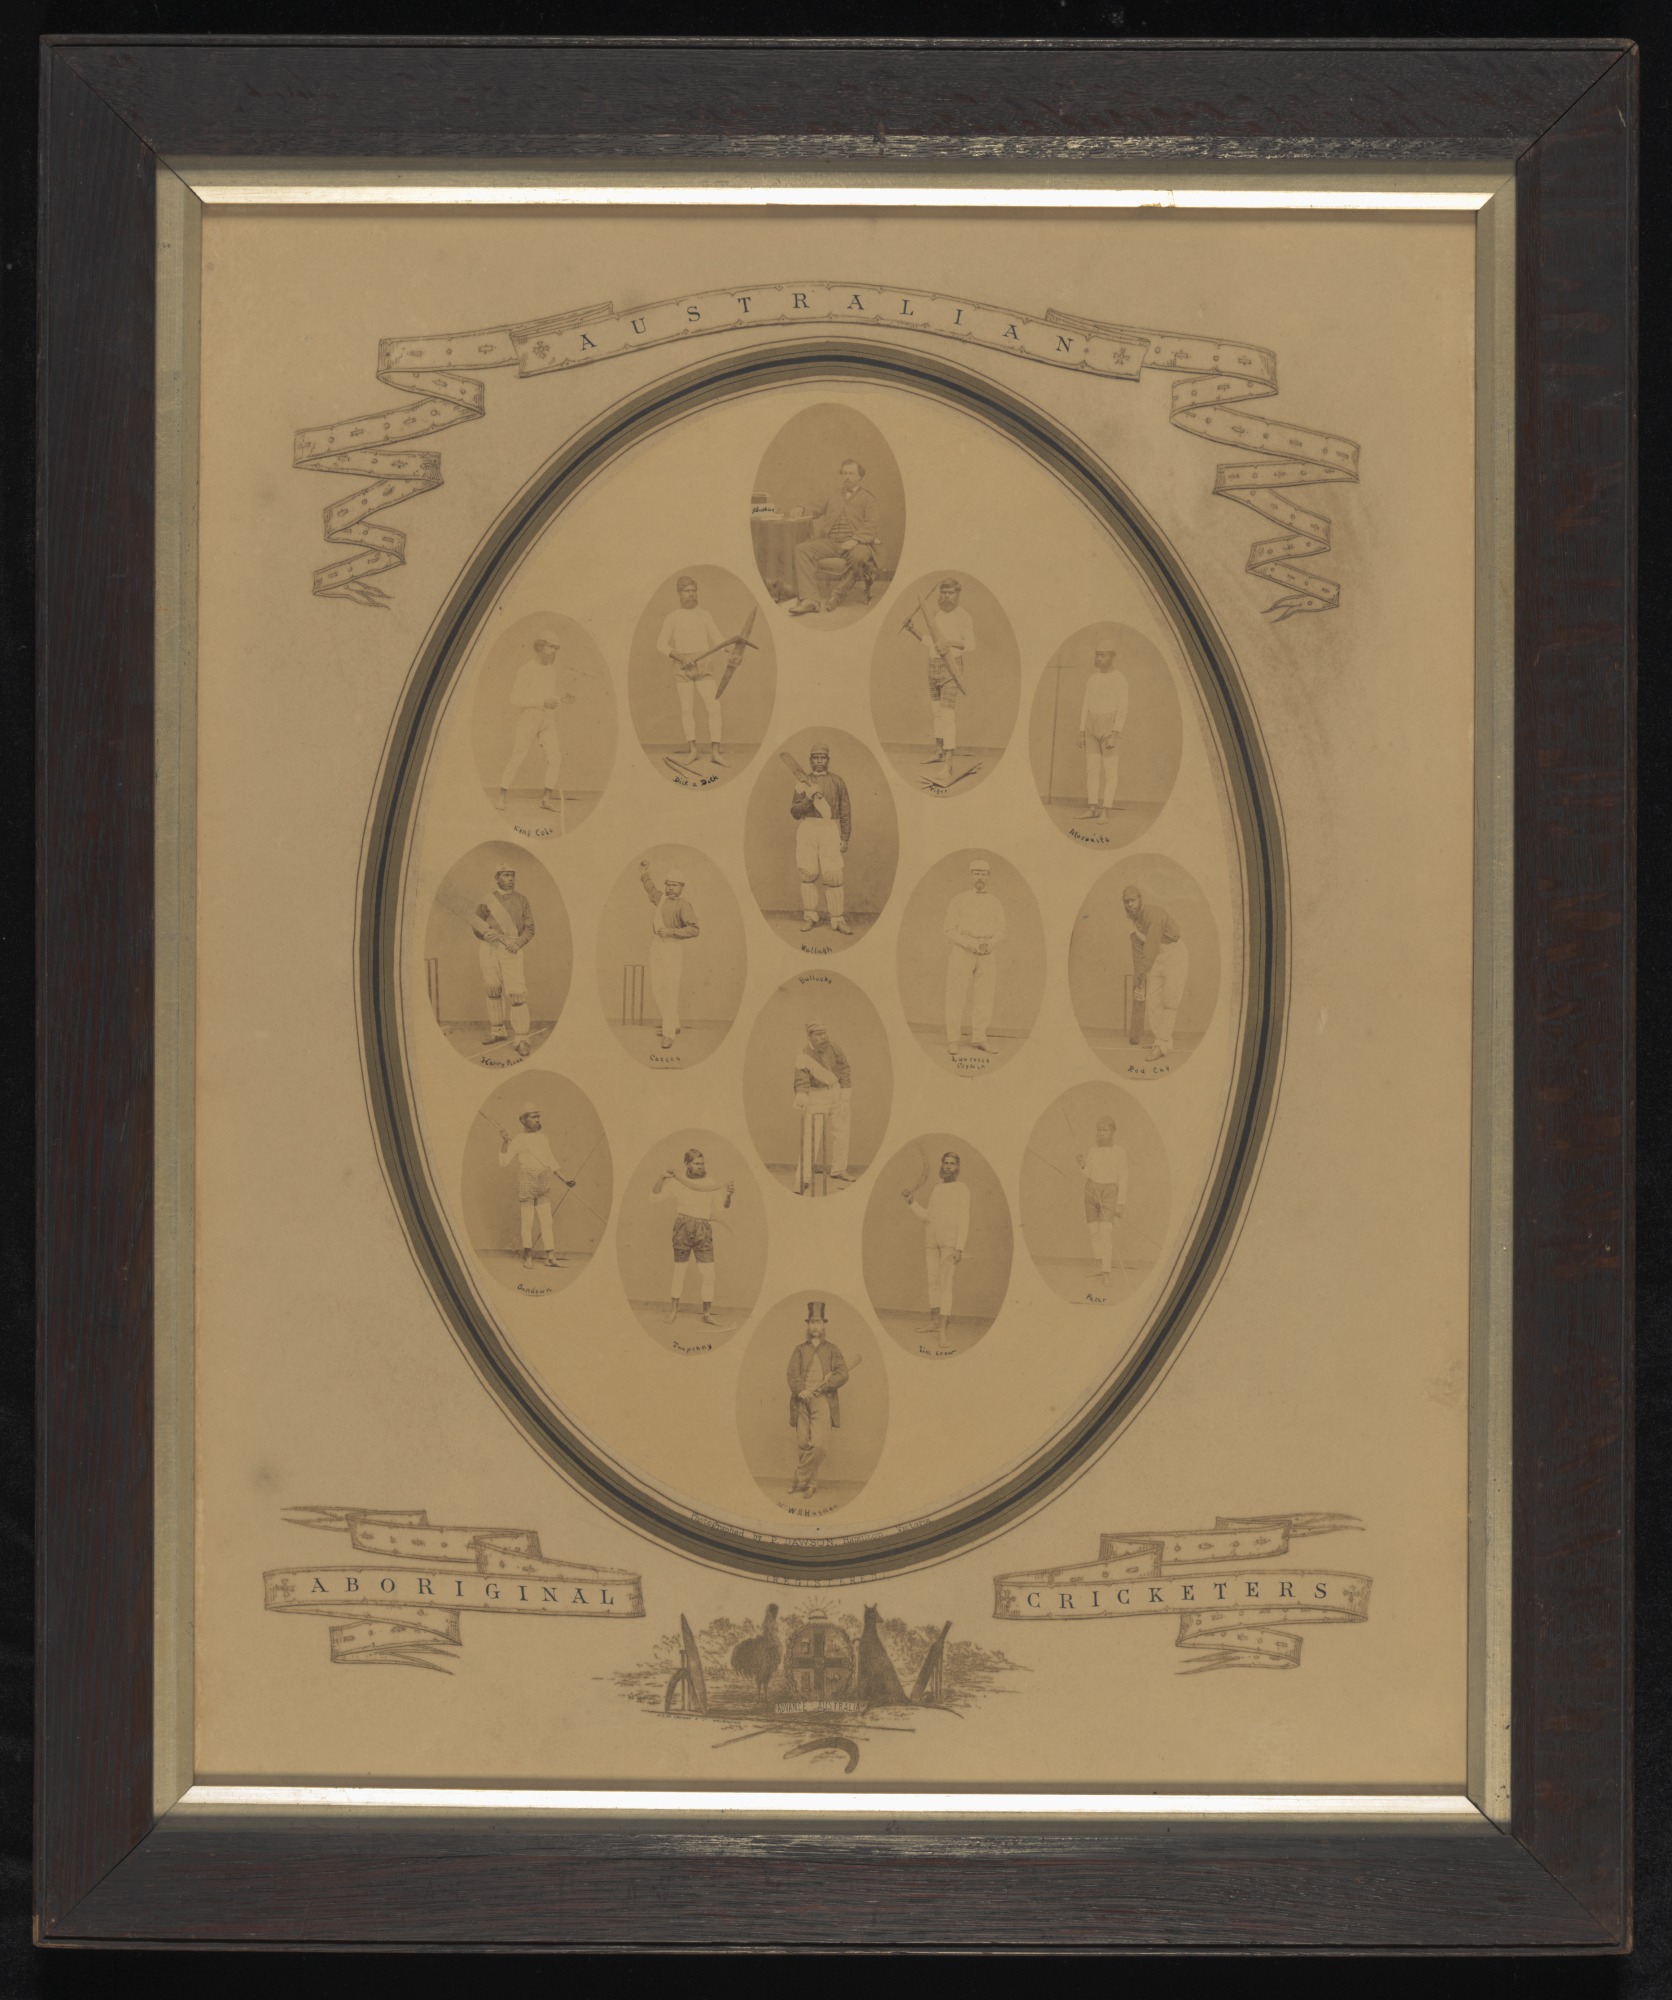 Photo collage by Peter Dawson to promote the 1868 Aboriginal cricket team tour.